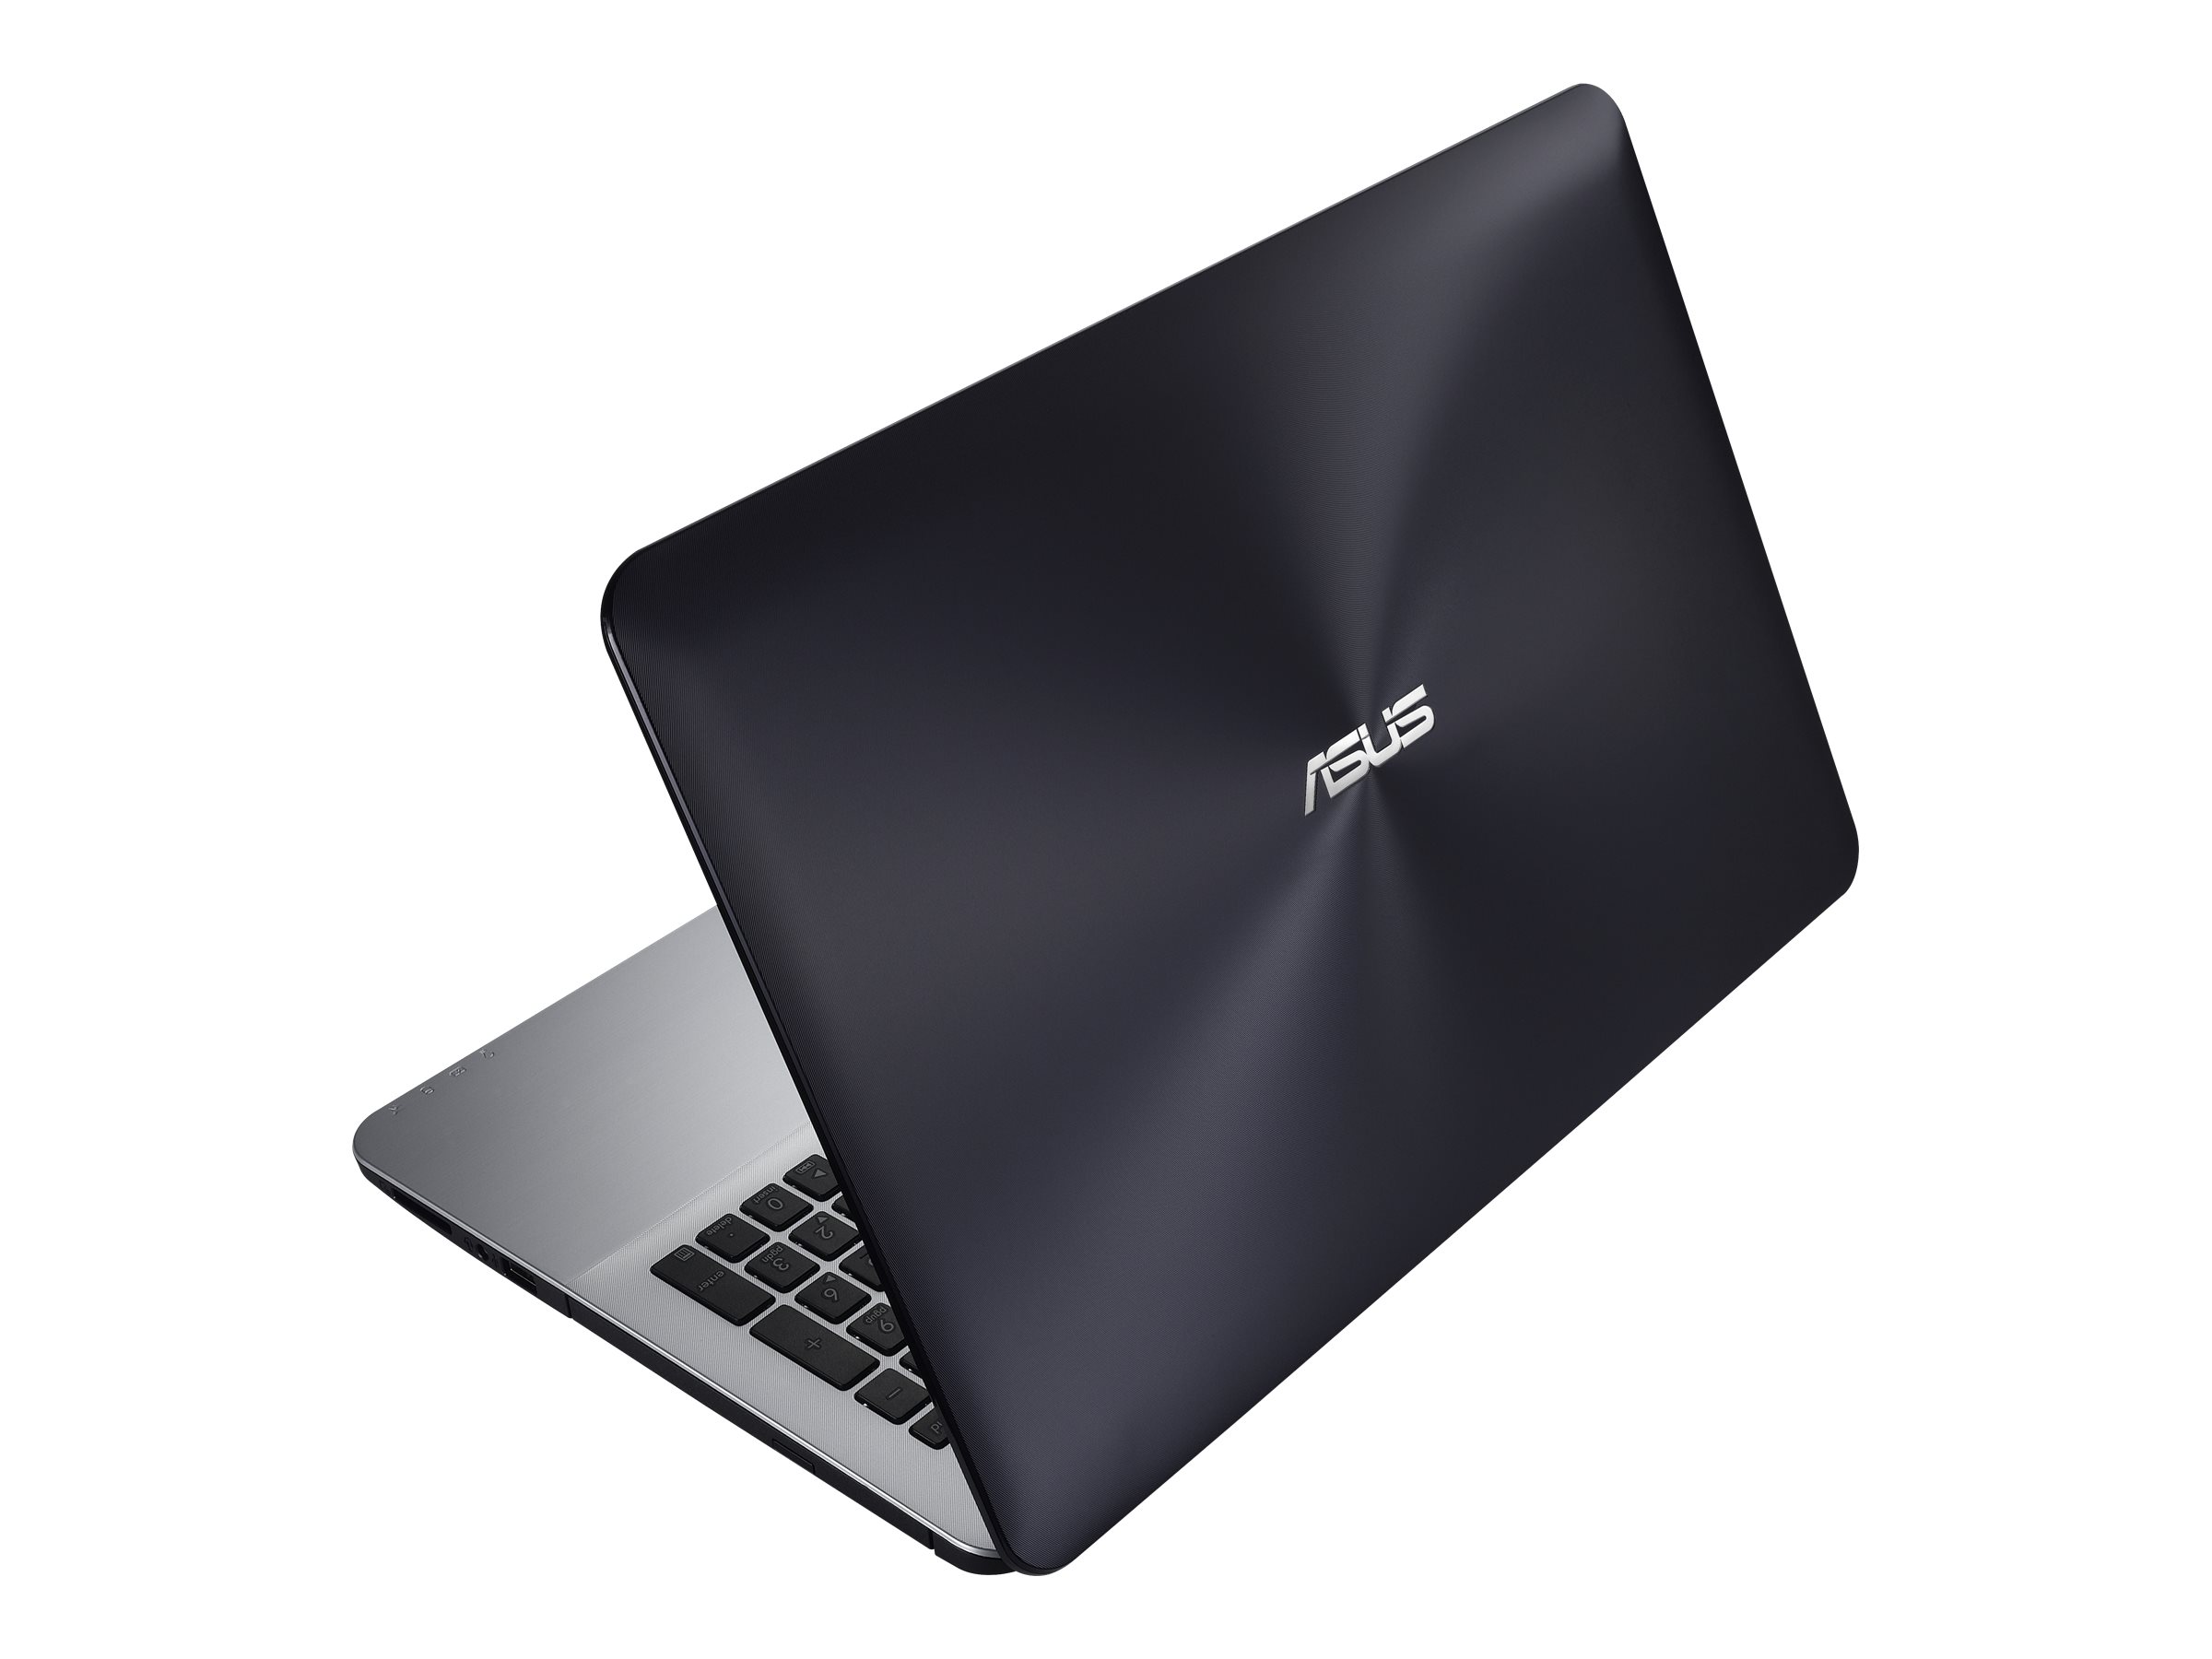 ASUS X555UA (DM059T) - pictures, photos and images